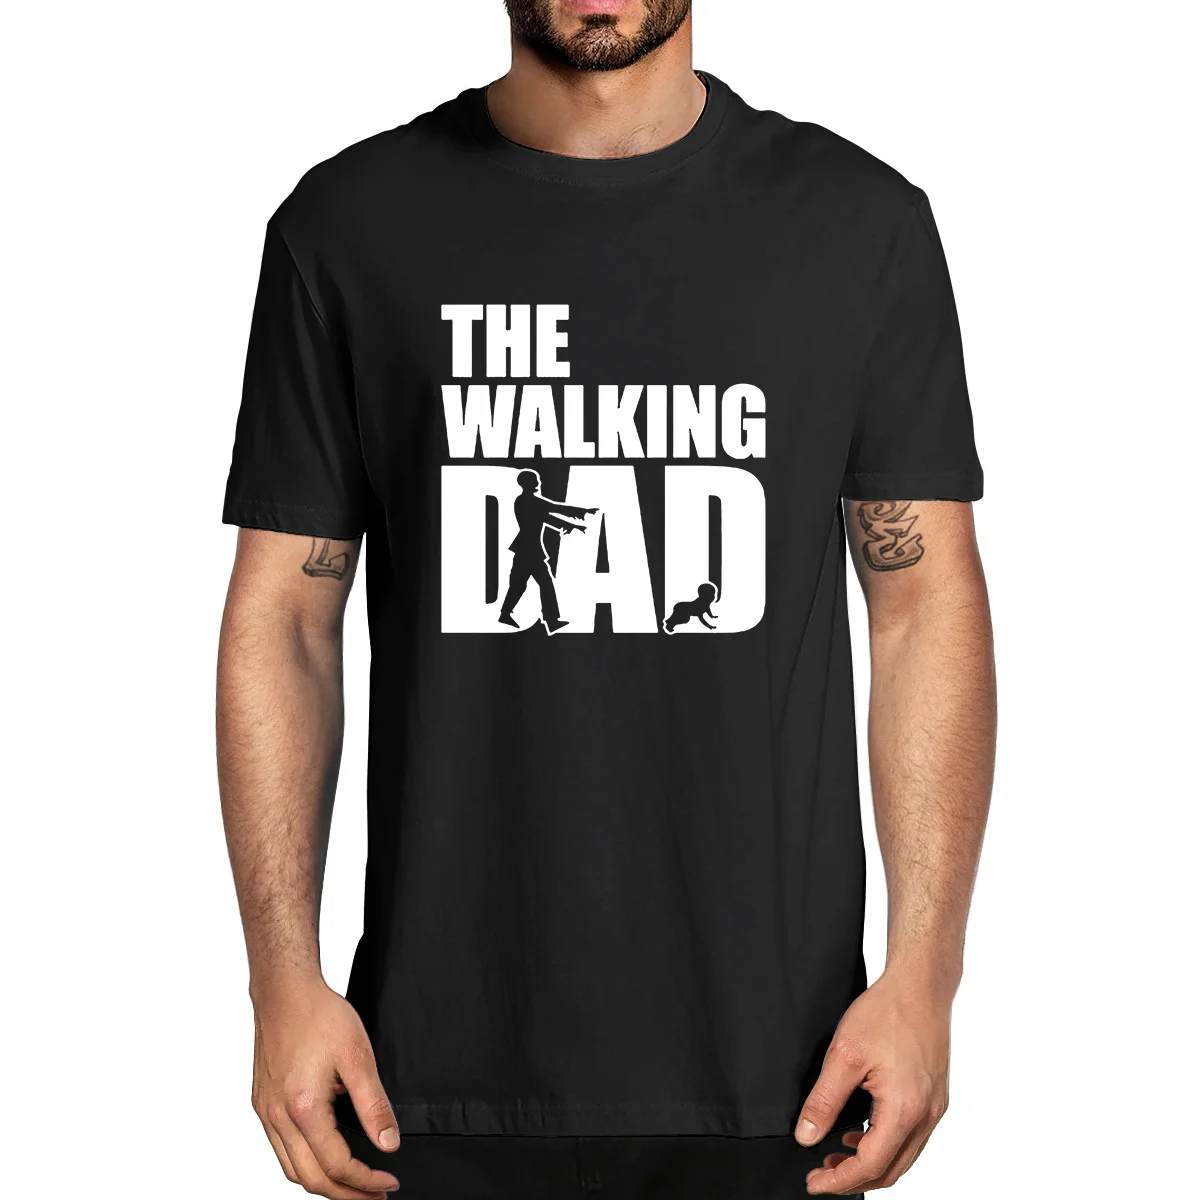 

The Walking Dad Camisetas Hombre Summer Men's 100% Cotton Novelty T-Shirt Unisex Humor Funny Women Soft Tee Father's Day Gift